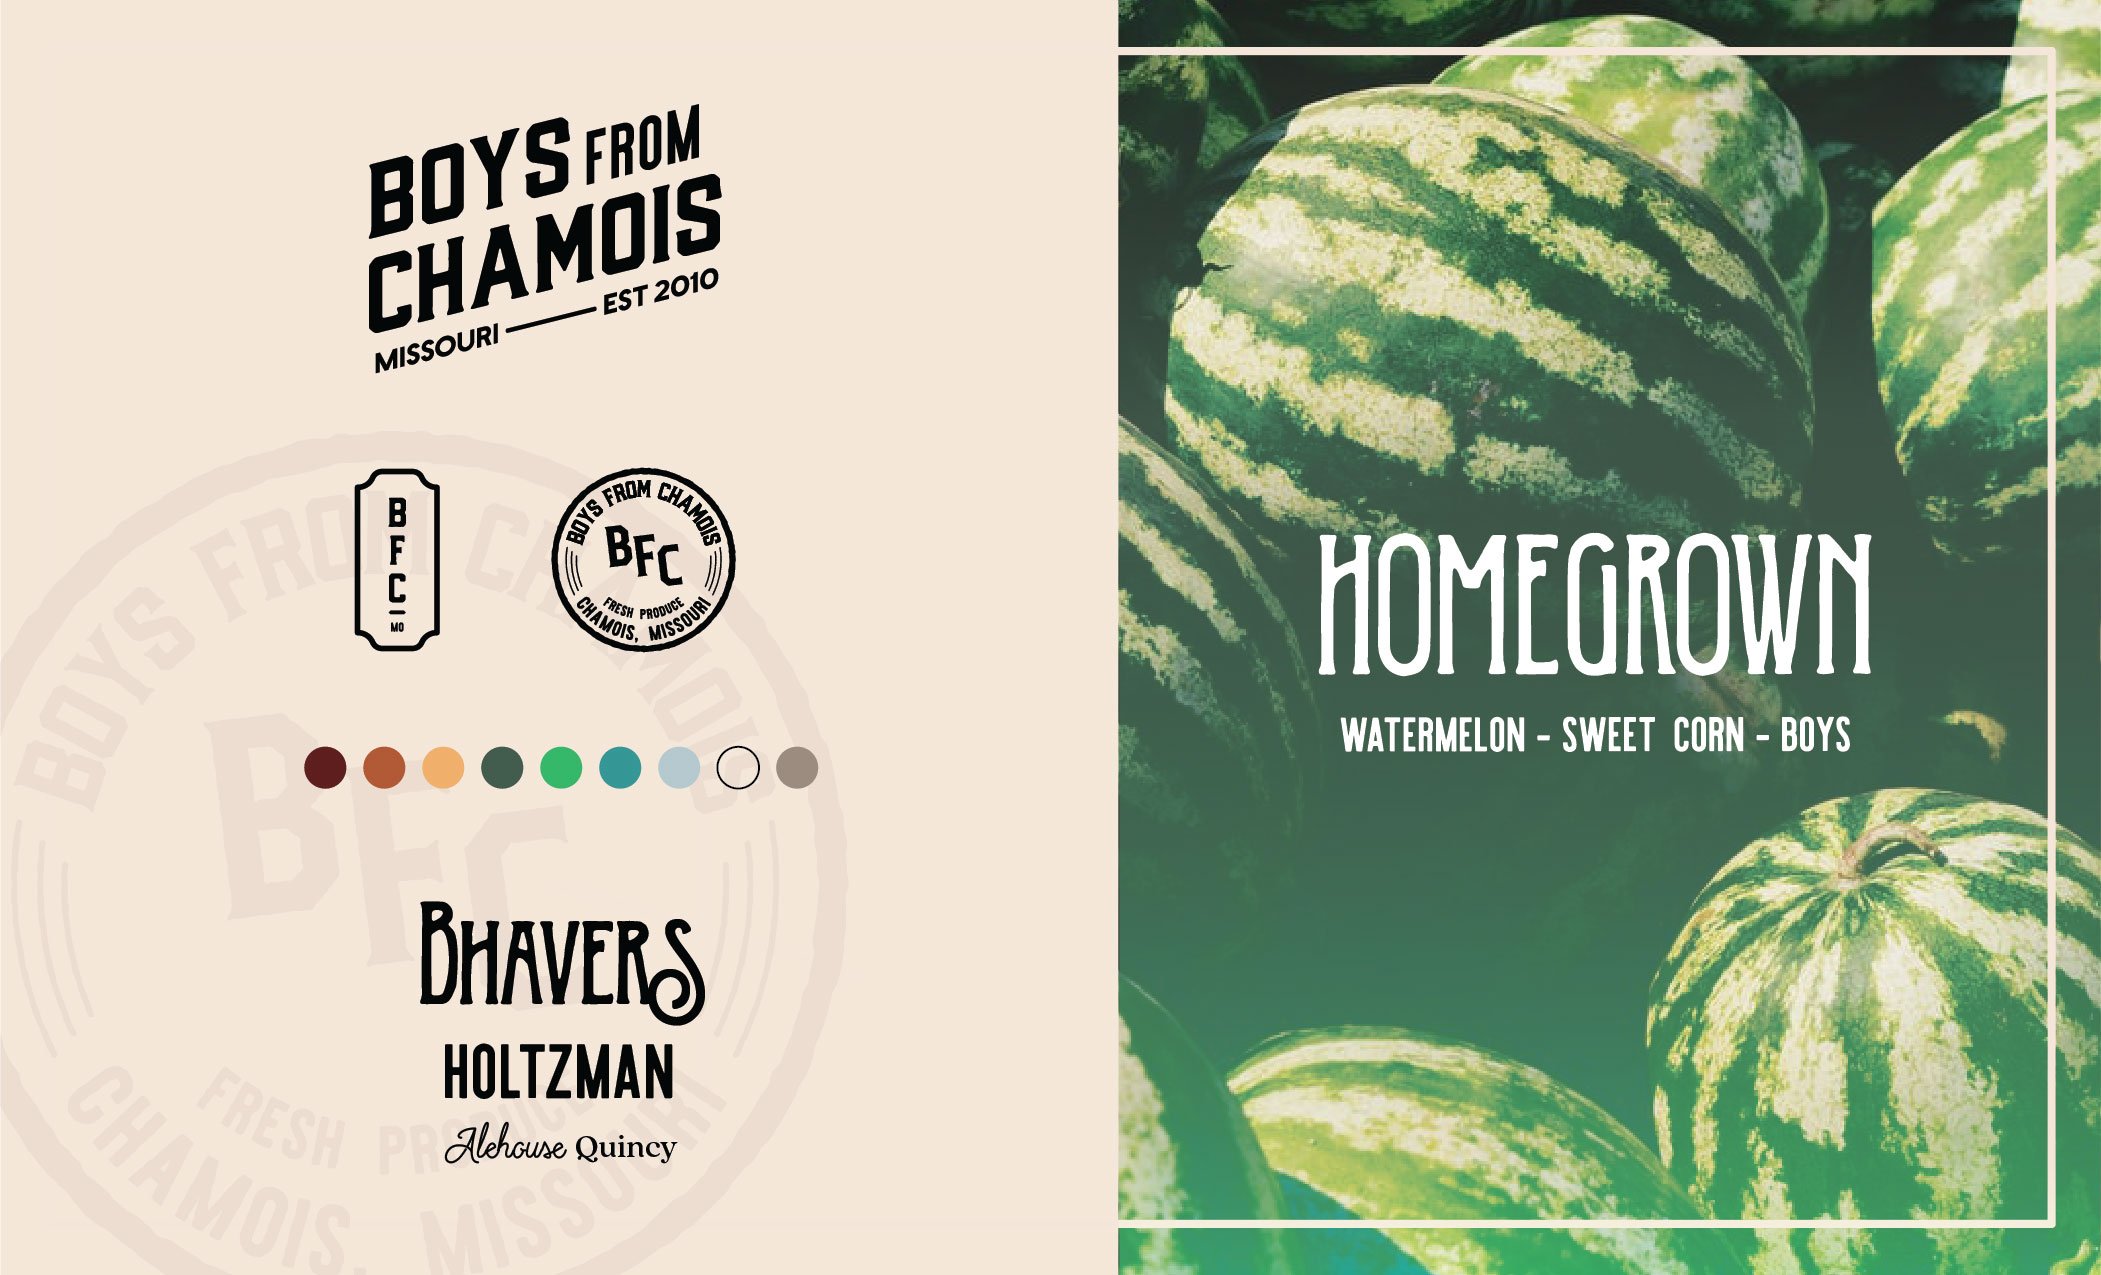  Boys From Chamois logo, logotype, color palette, and font family. 